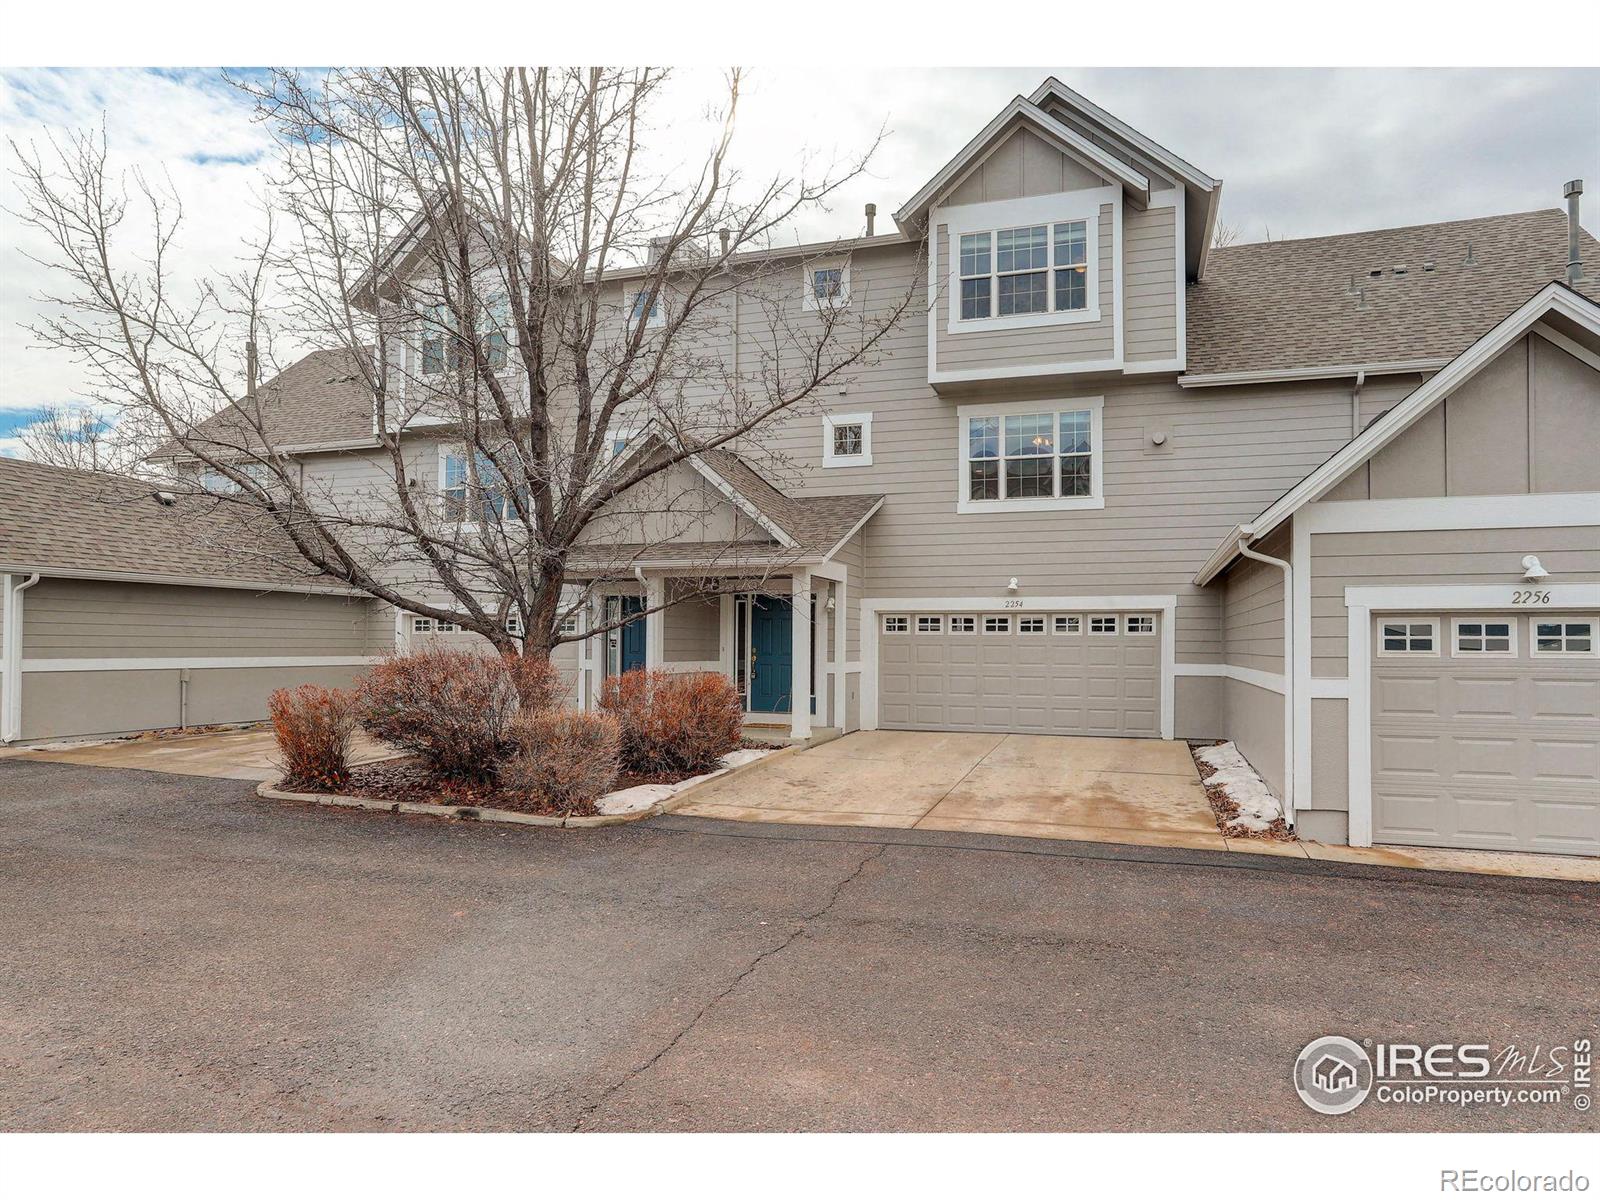 2254  Watersong Circle, longmont MLS: 4567891002129 Beds: 3 Baths: 3 Price: $529,000